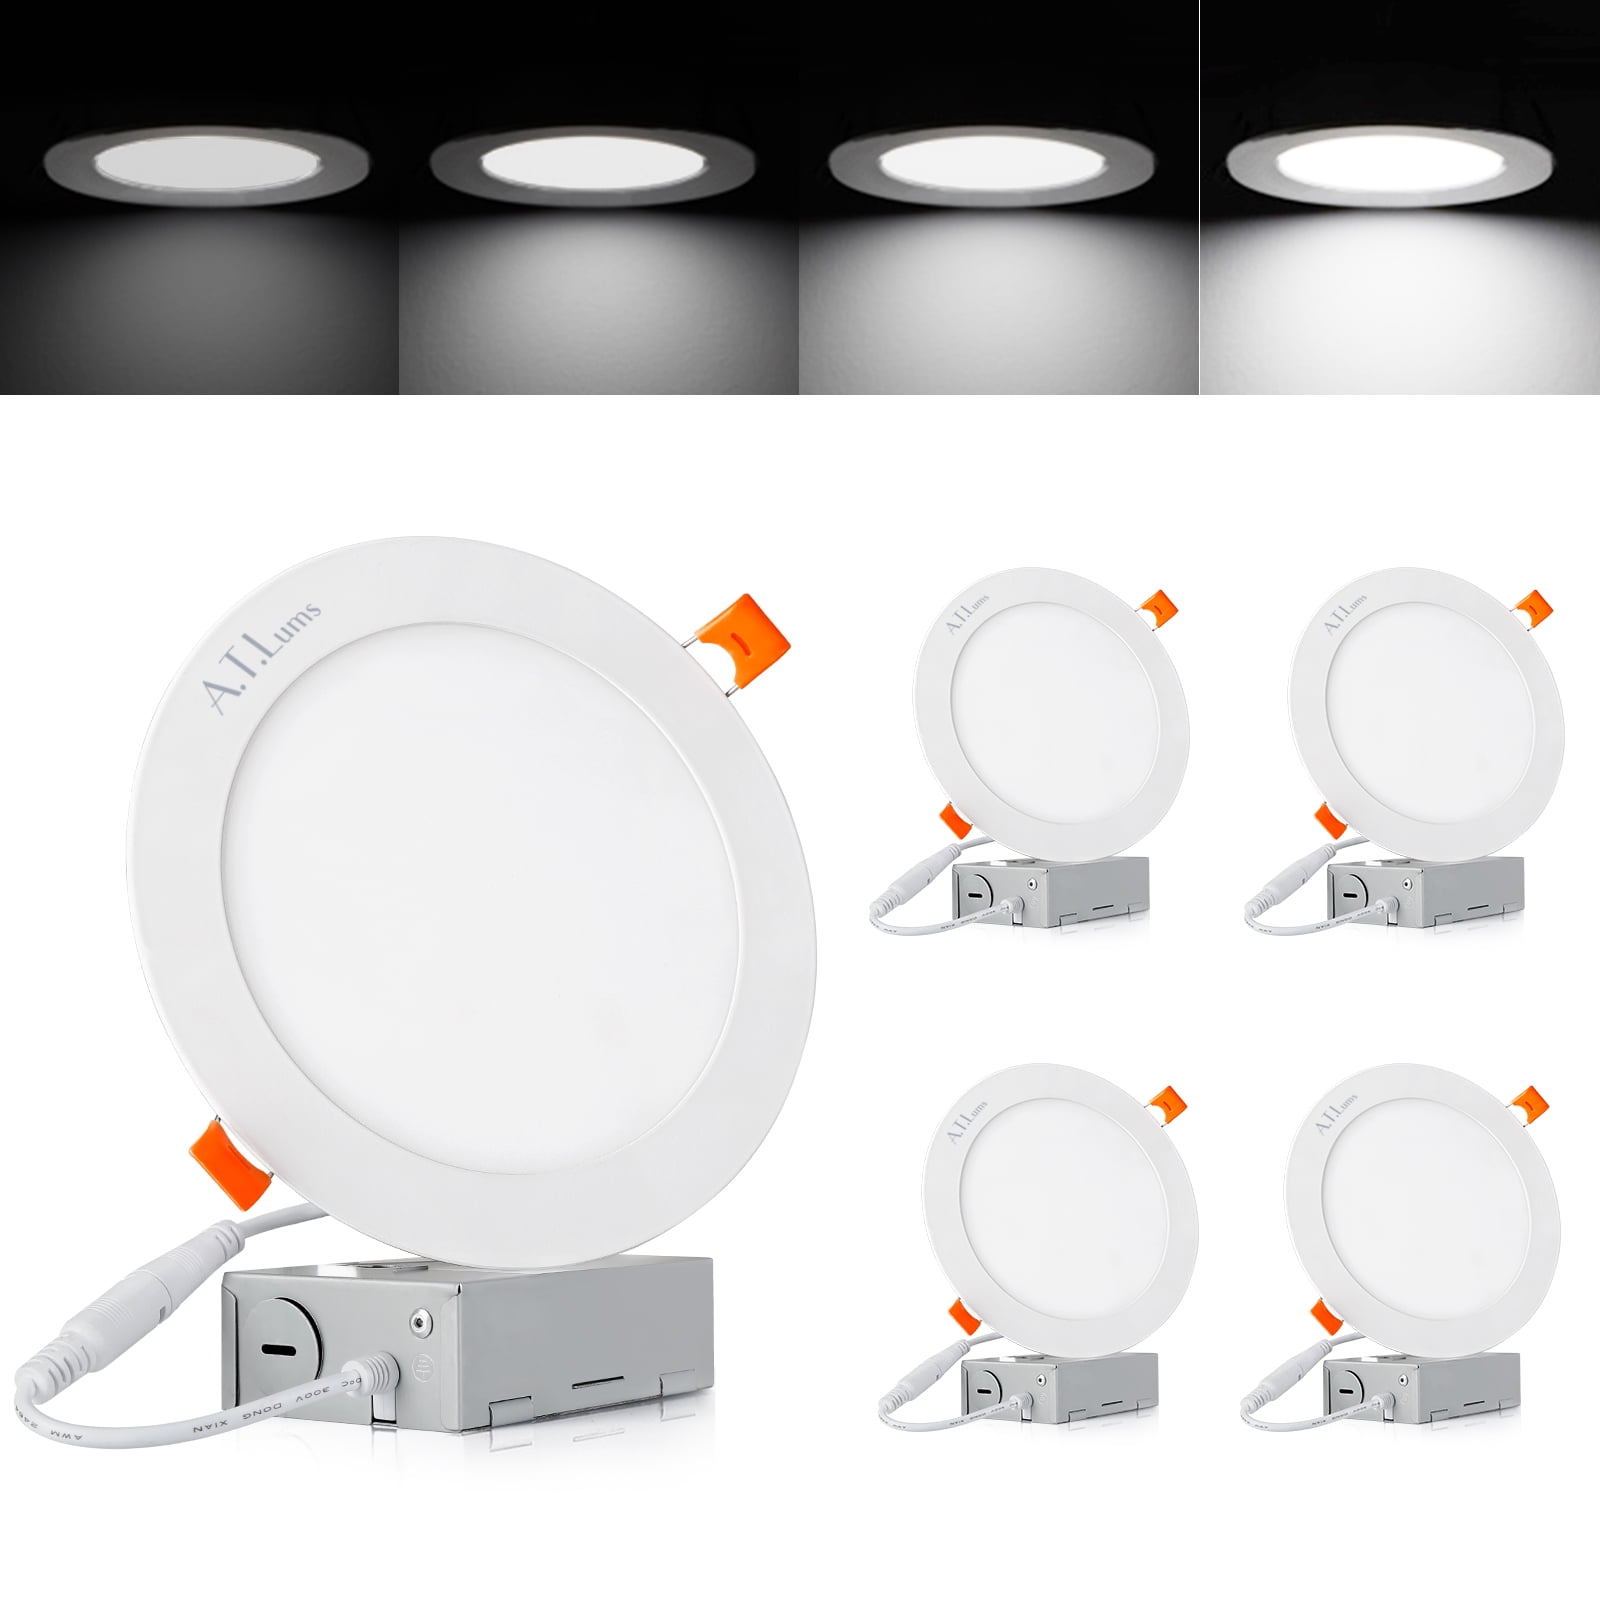 6 inch LED Recessed Lighting, 4 Pack Slim Recessed Downlight with J-Box, 15W Dimmable, 5000K, White - Walmart.com